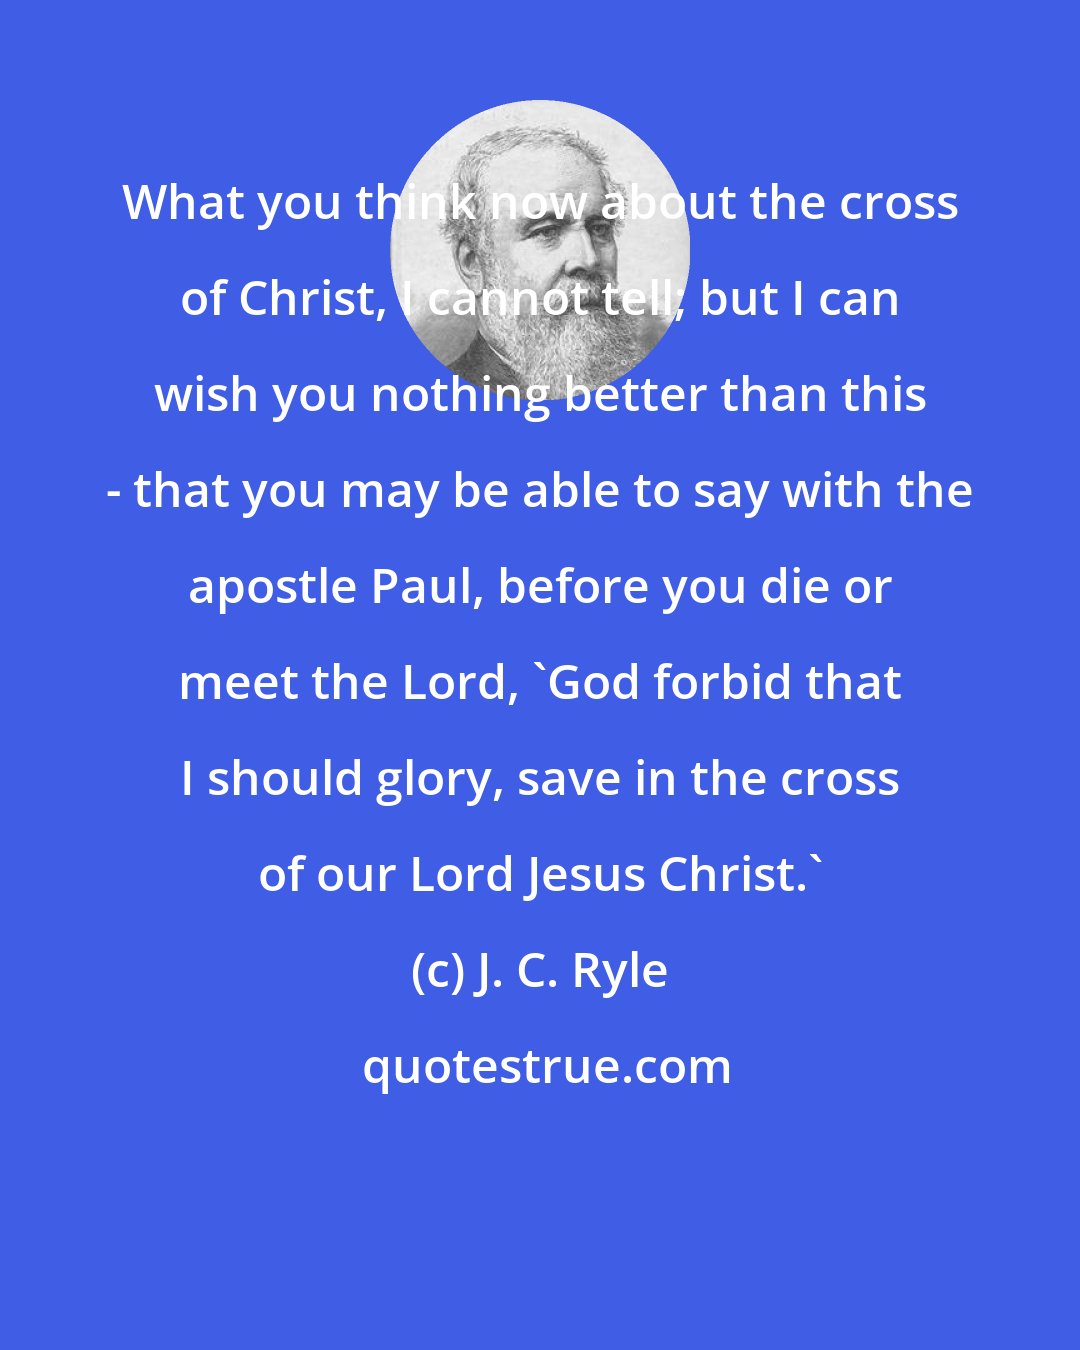 J. C. Ryle: What you think now about the cross of Christ, I cannot tell; but I can wish you nothing better than this - that you may be able to say with the apostle Paul, before you die or meet the Lord, 'God forbid that I should glory, save in the cross of our Lord Jesus Christ.'